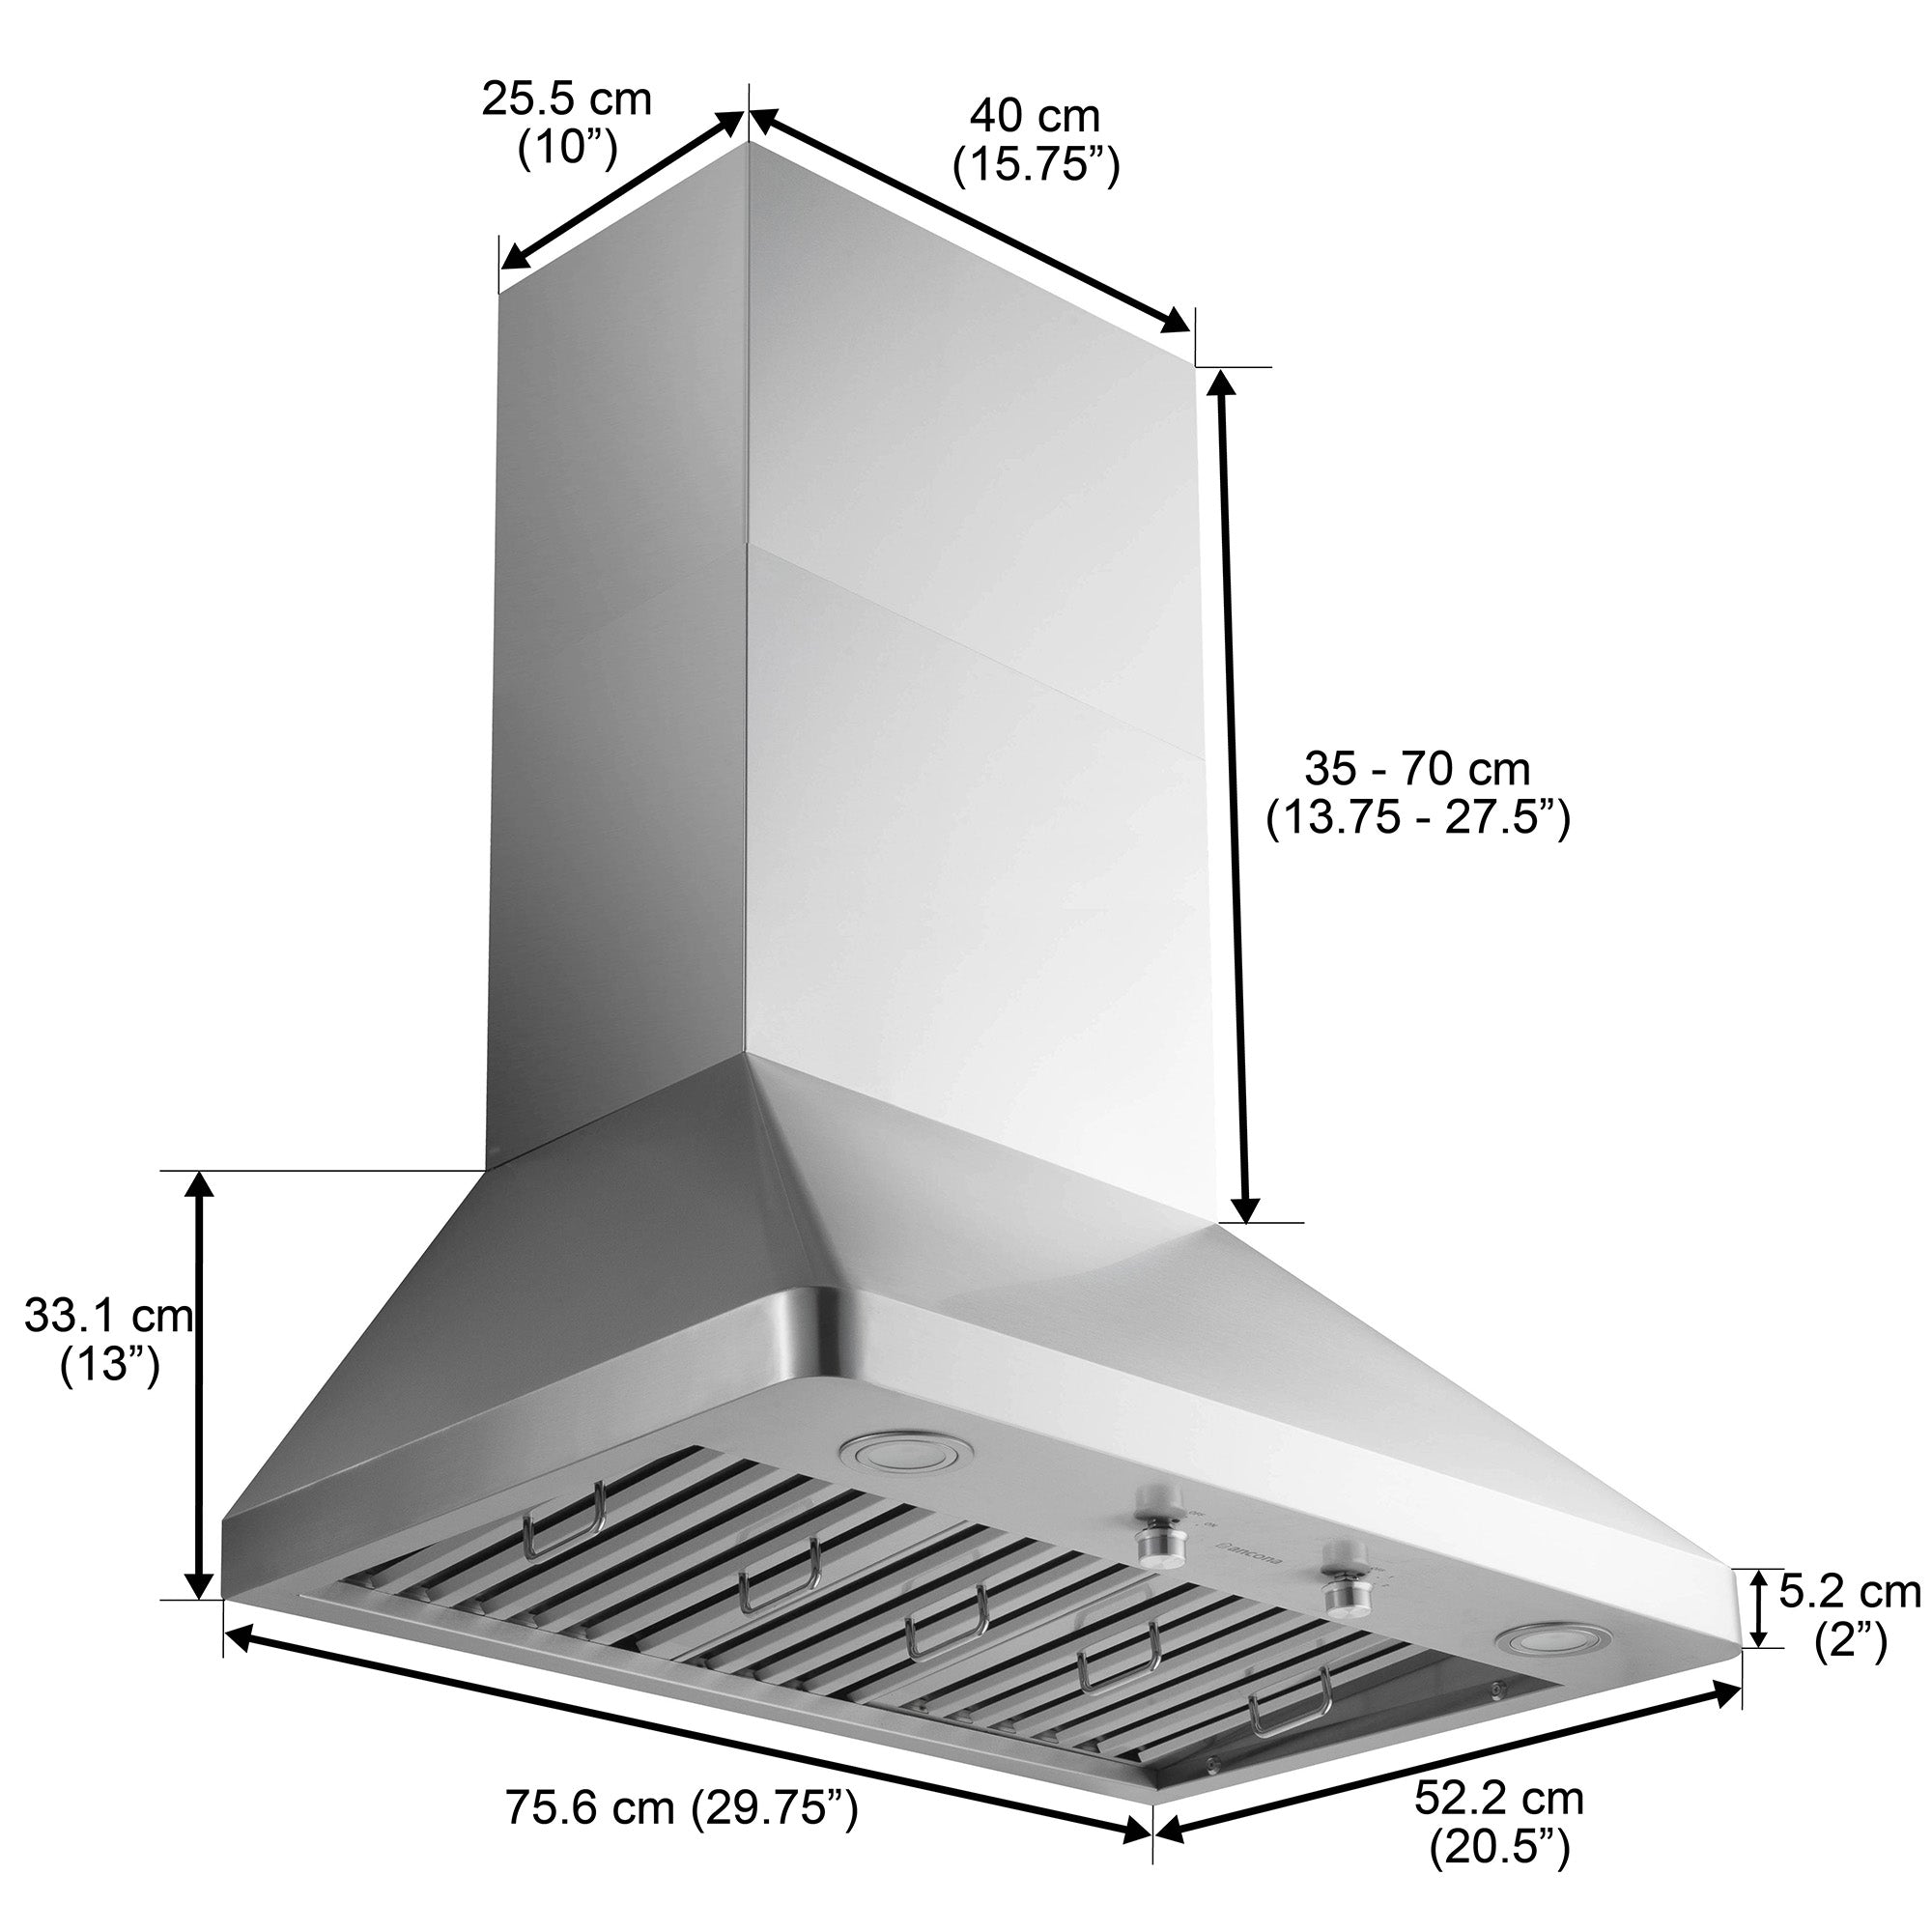 Ancona 30 in. Pro Series 1000CFM Ducted Wall Mount Range Hood in Stainless Steel